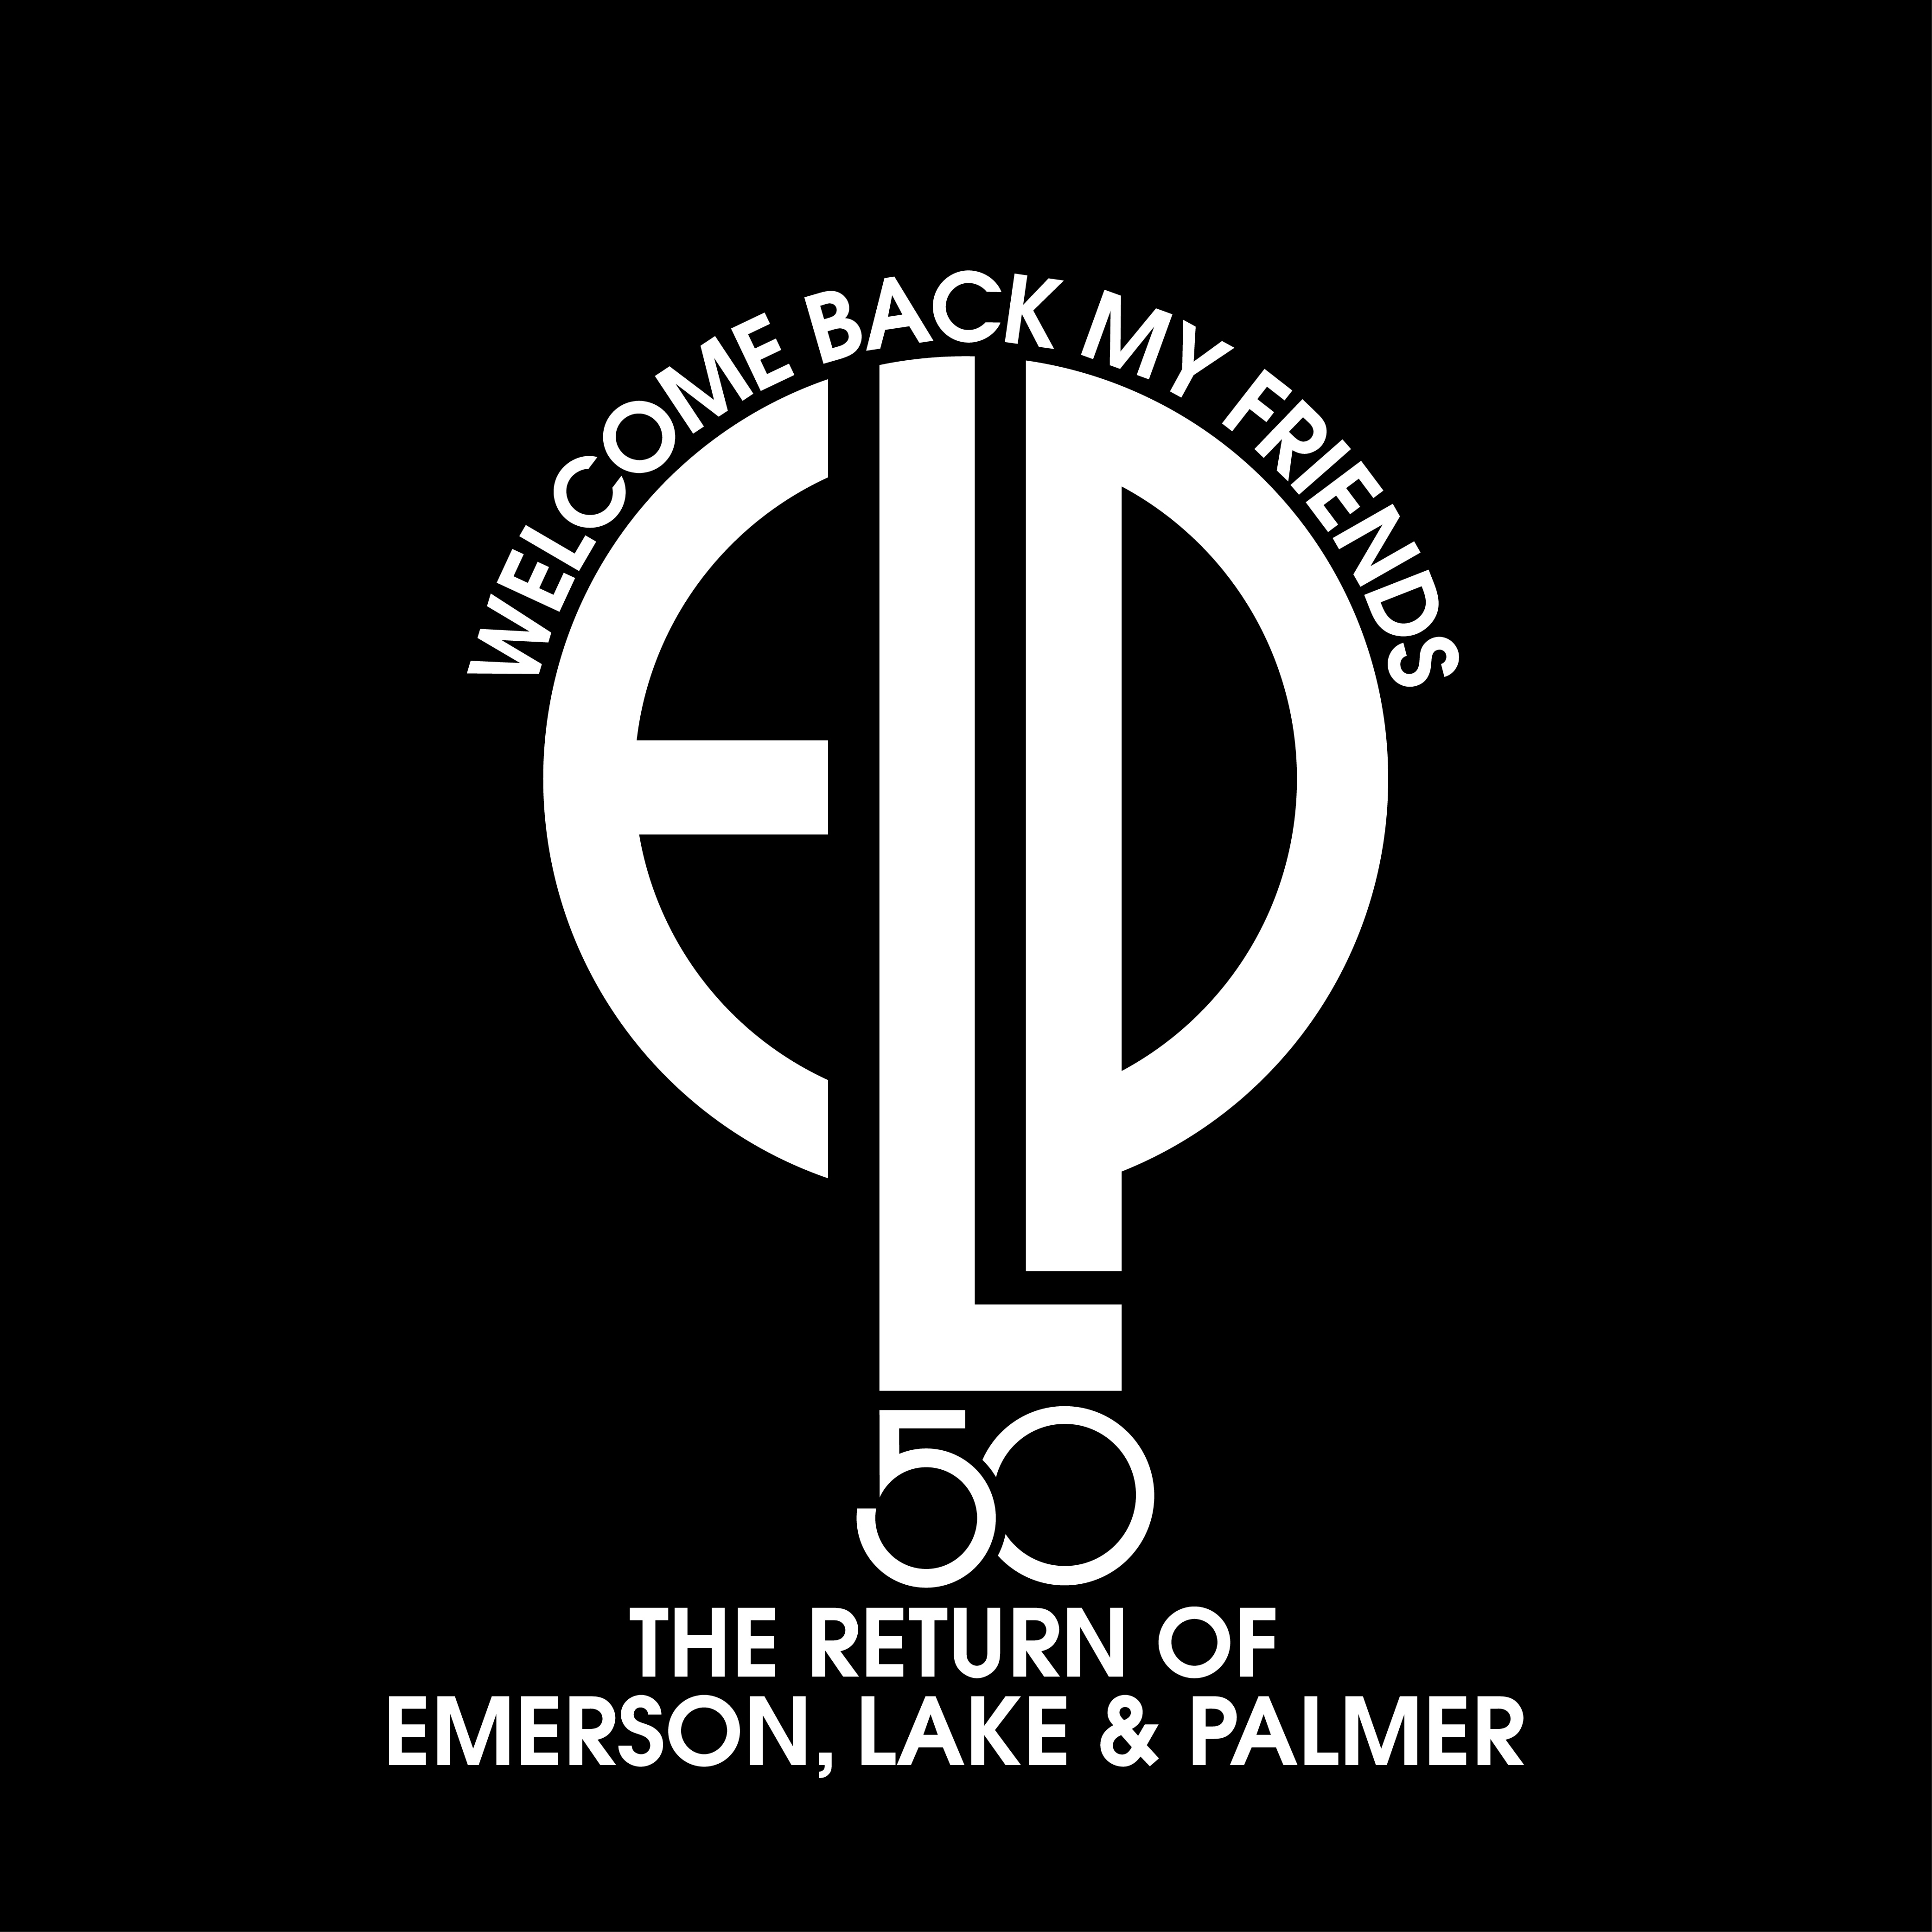 BACK MY FRIENDS THE RETURN OF EMERSON LAKE & PALMER Tour